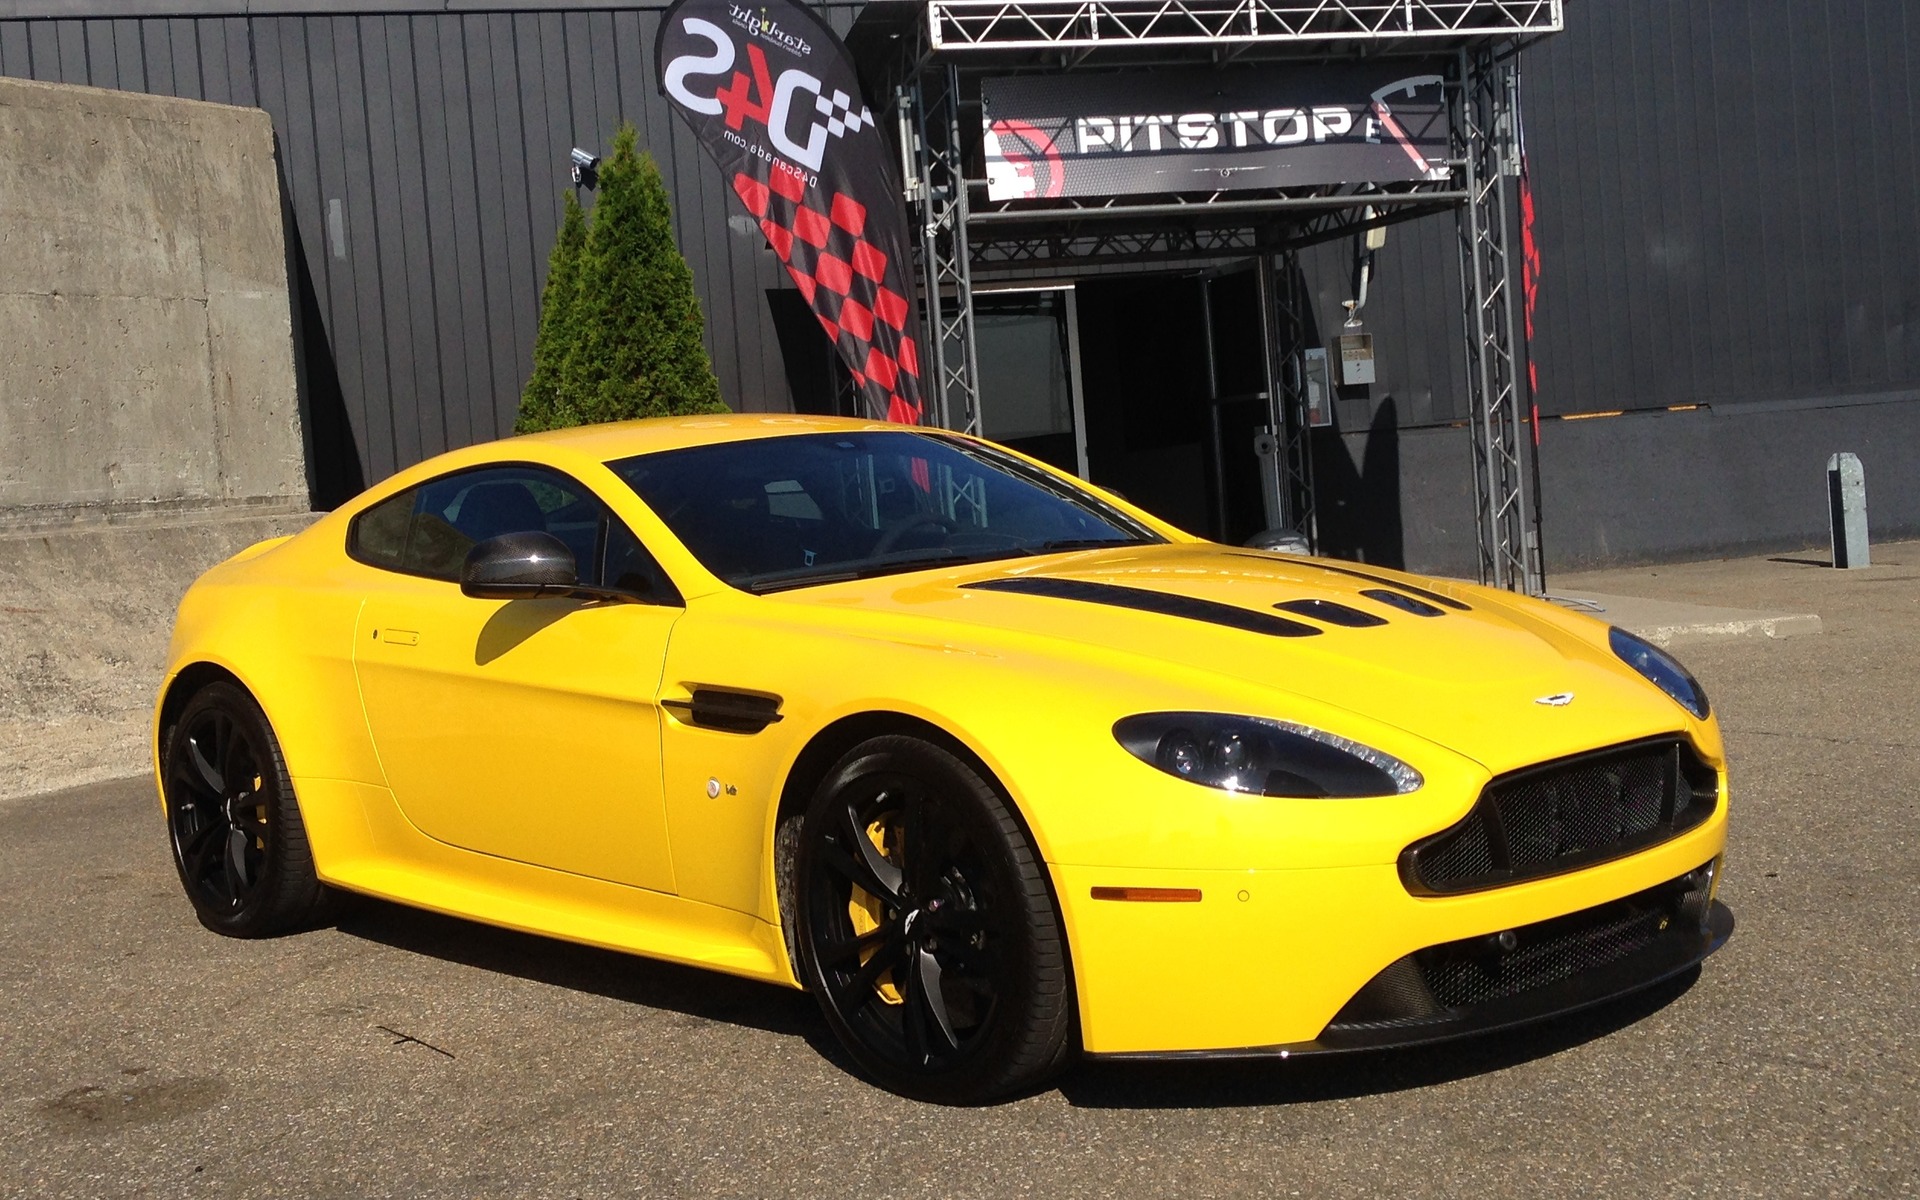 This Vantage S V12 Coupe didn't get to race around ICAR.